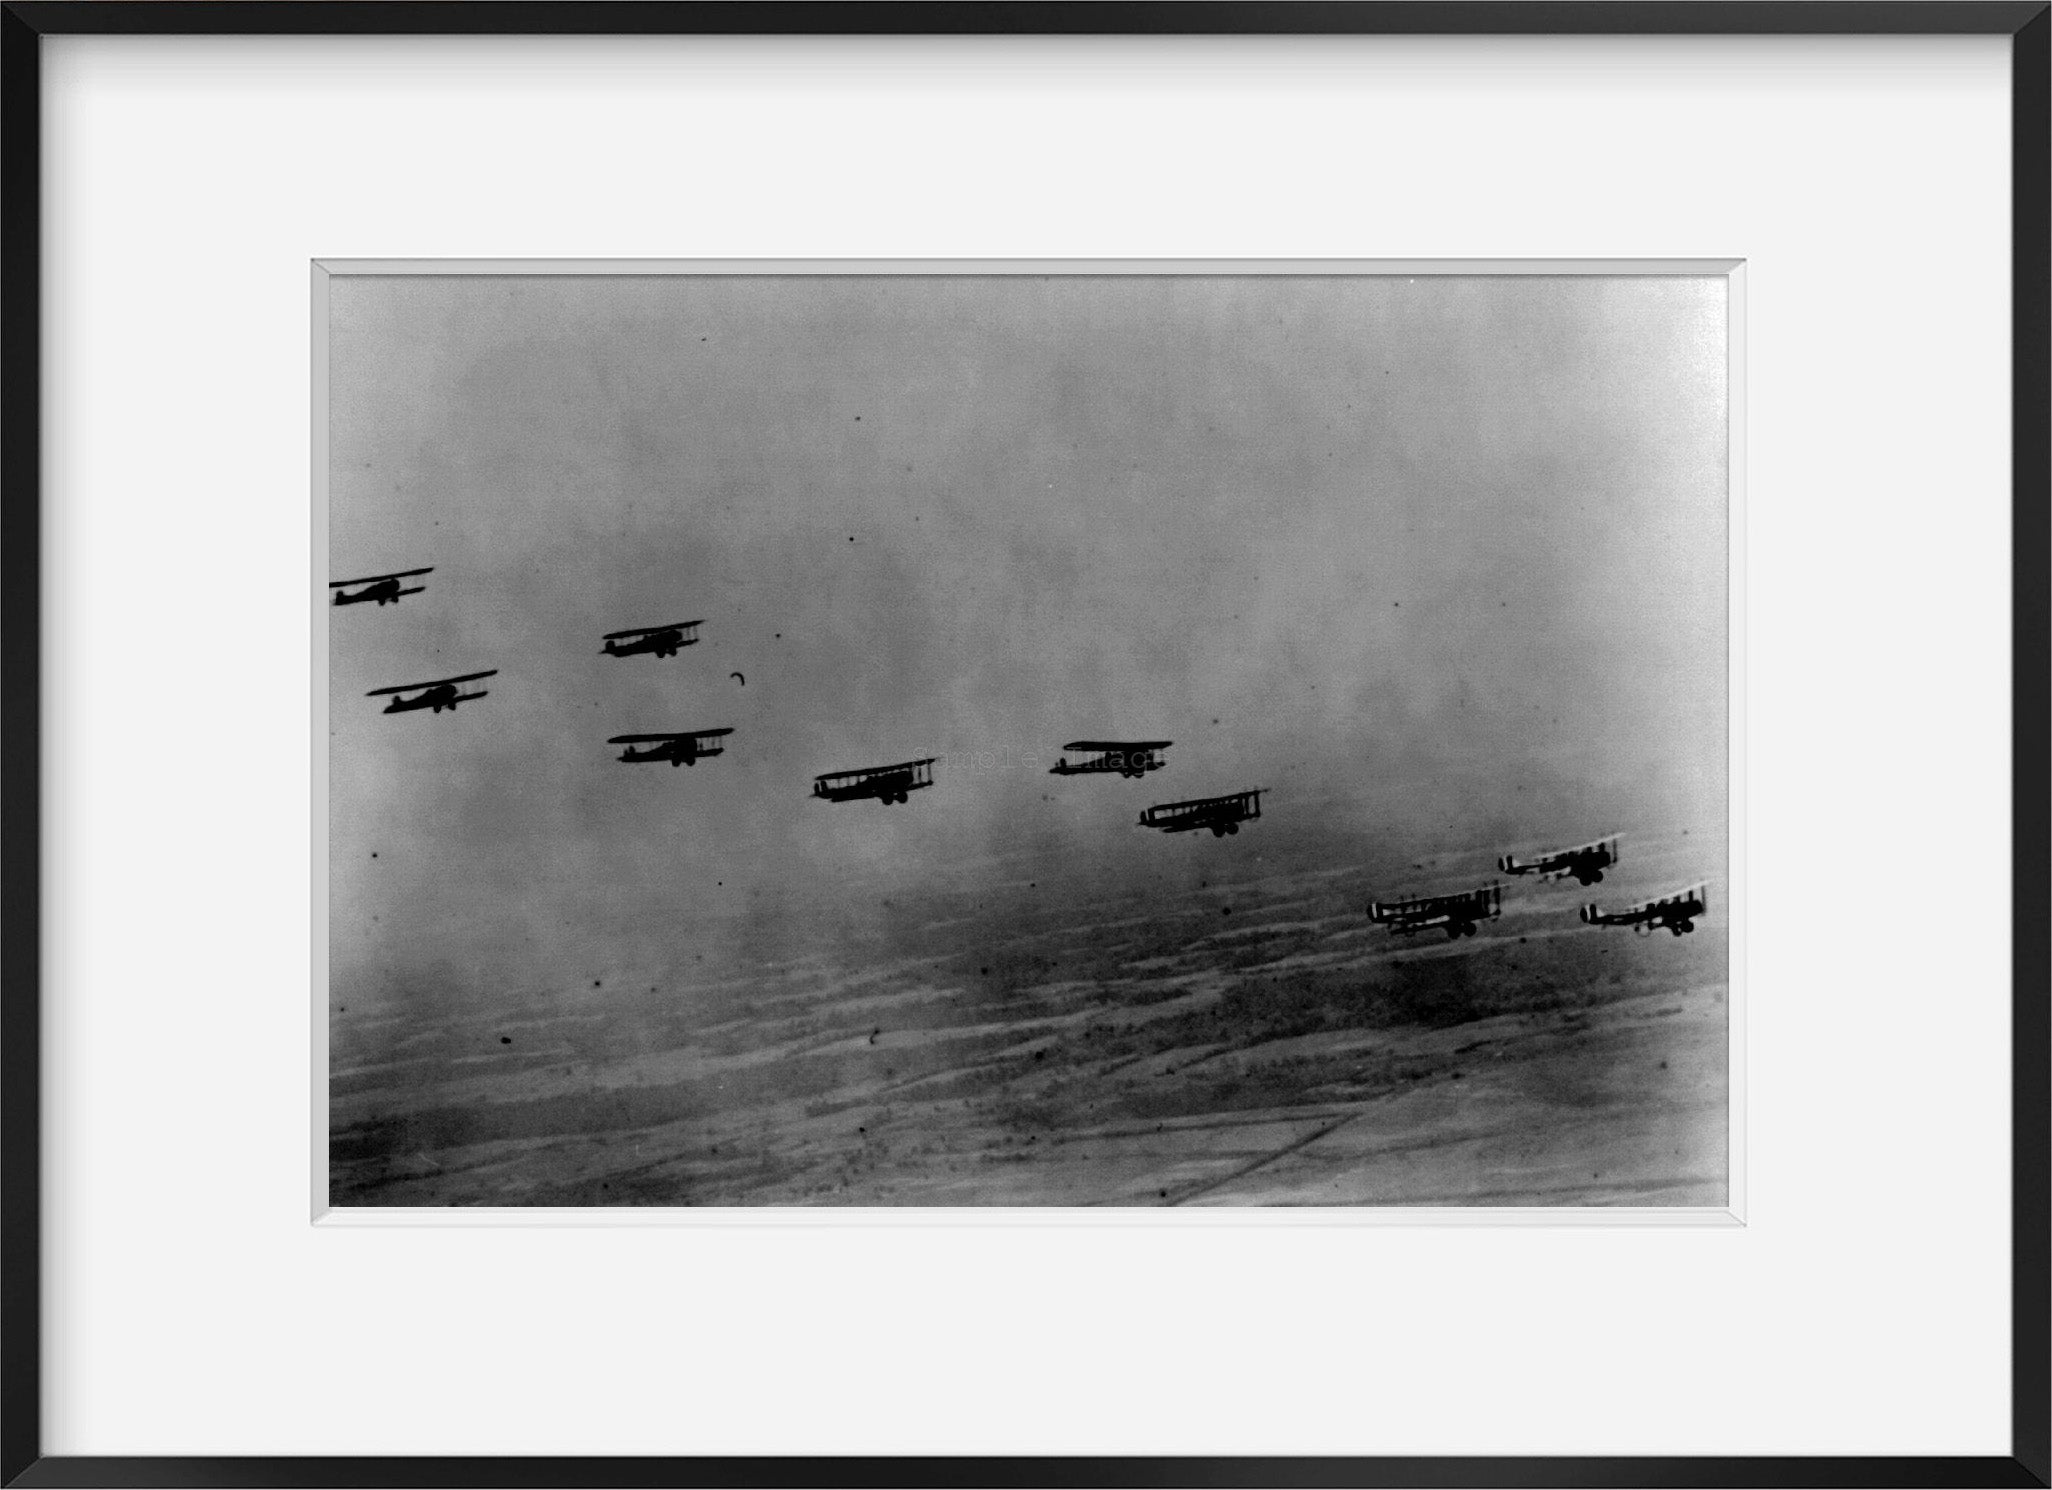 ca. 1914-1918 photograph of View from airplane of biplanes flying in formation: